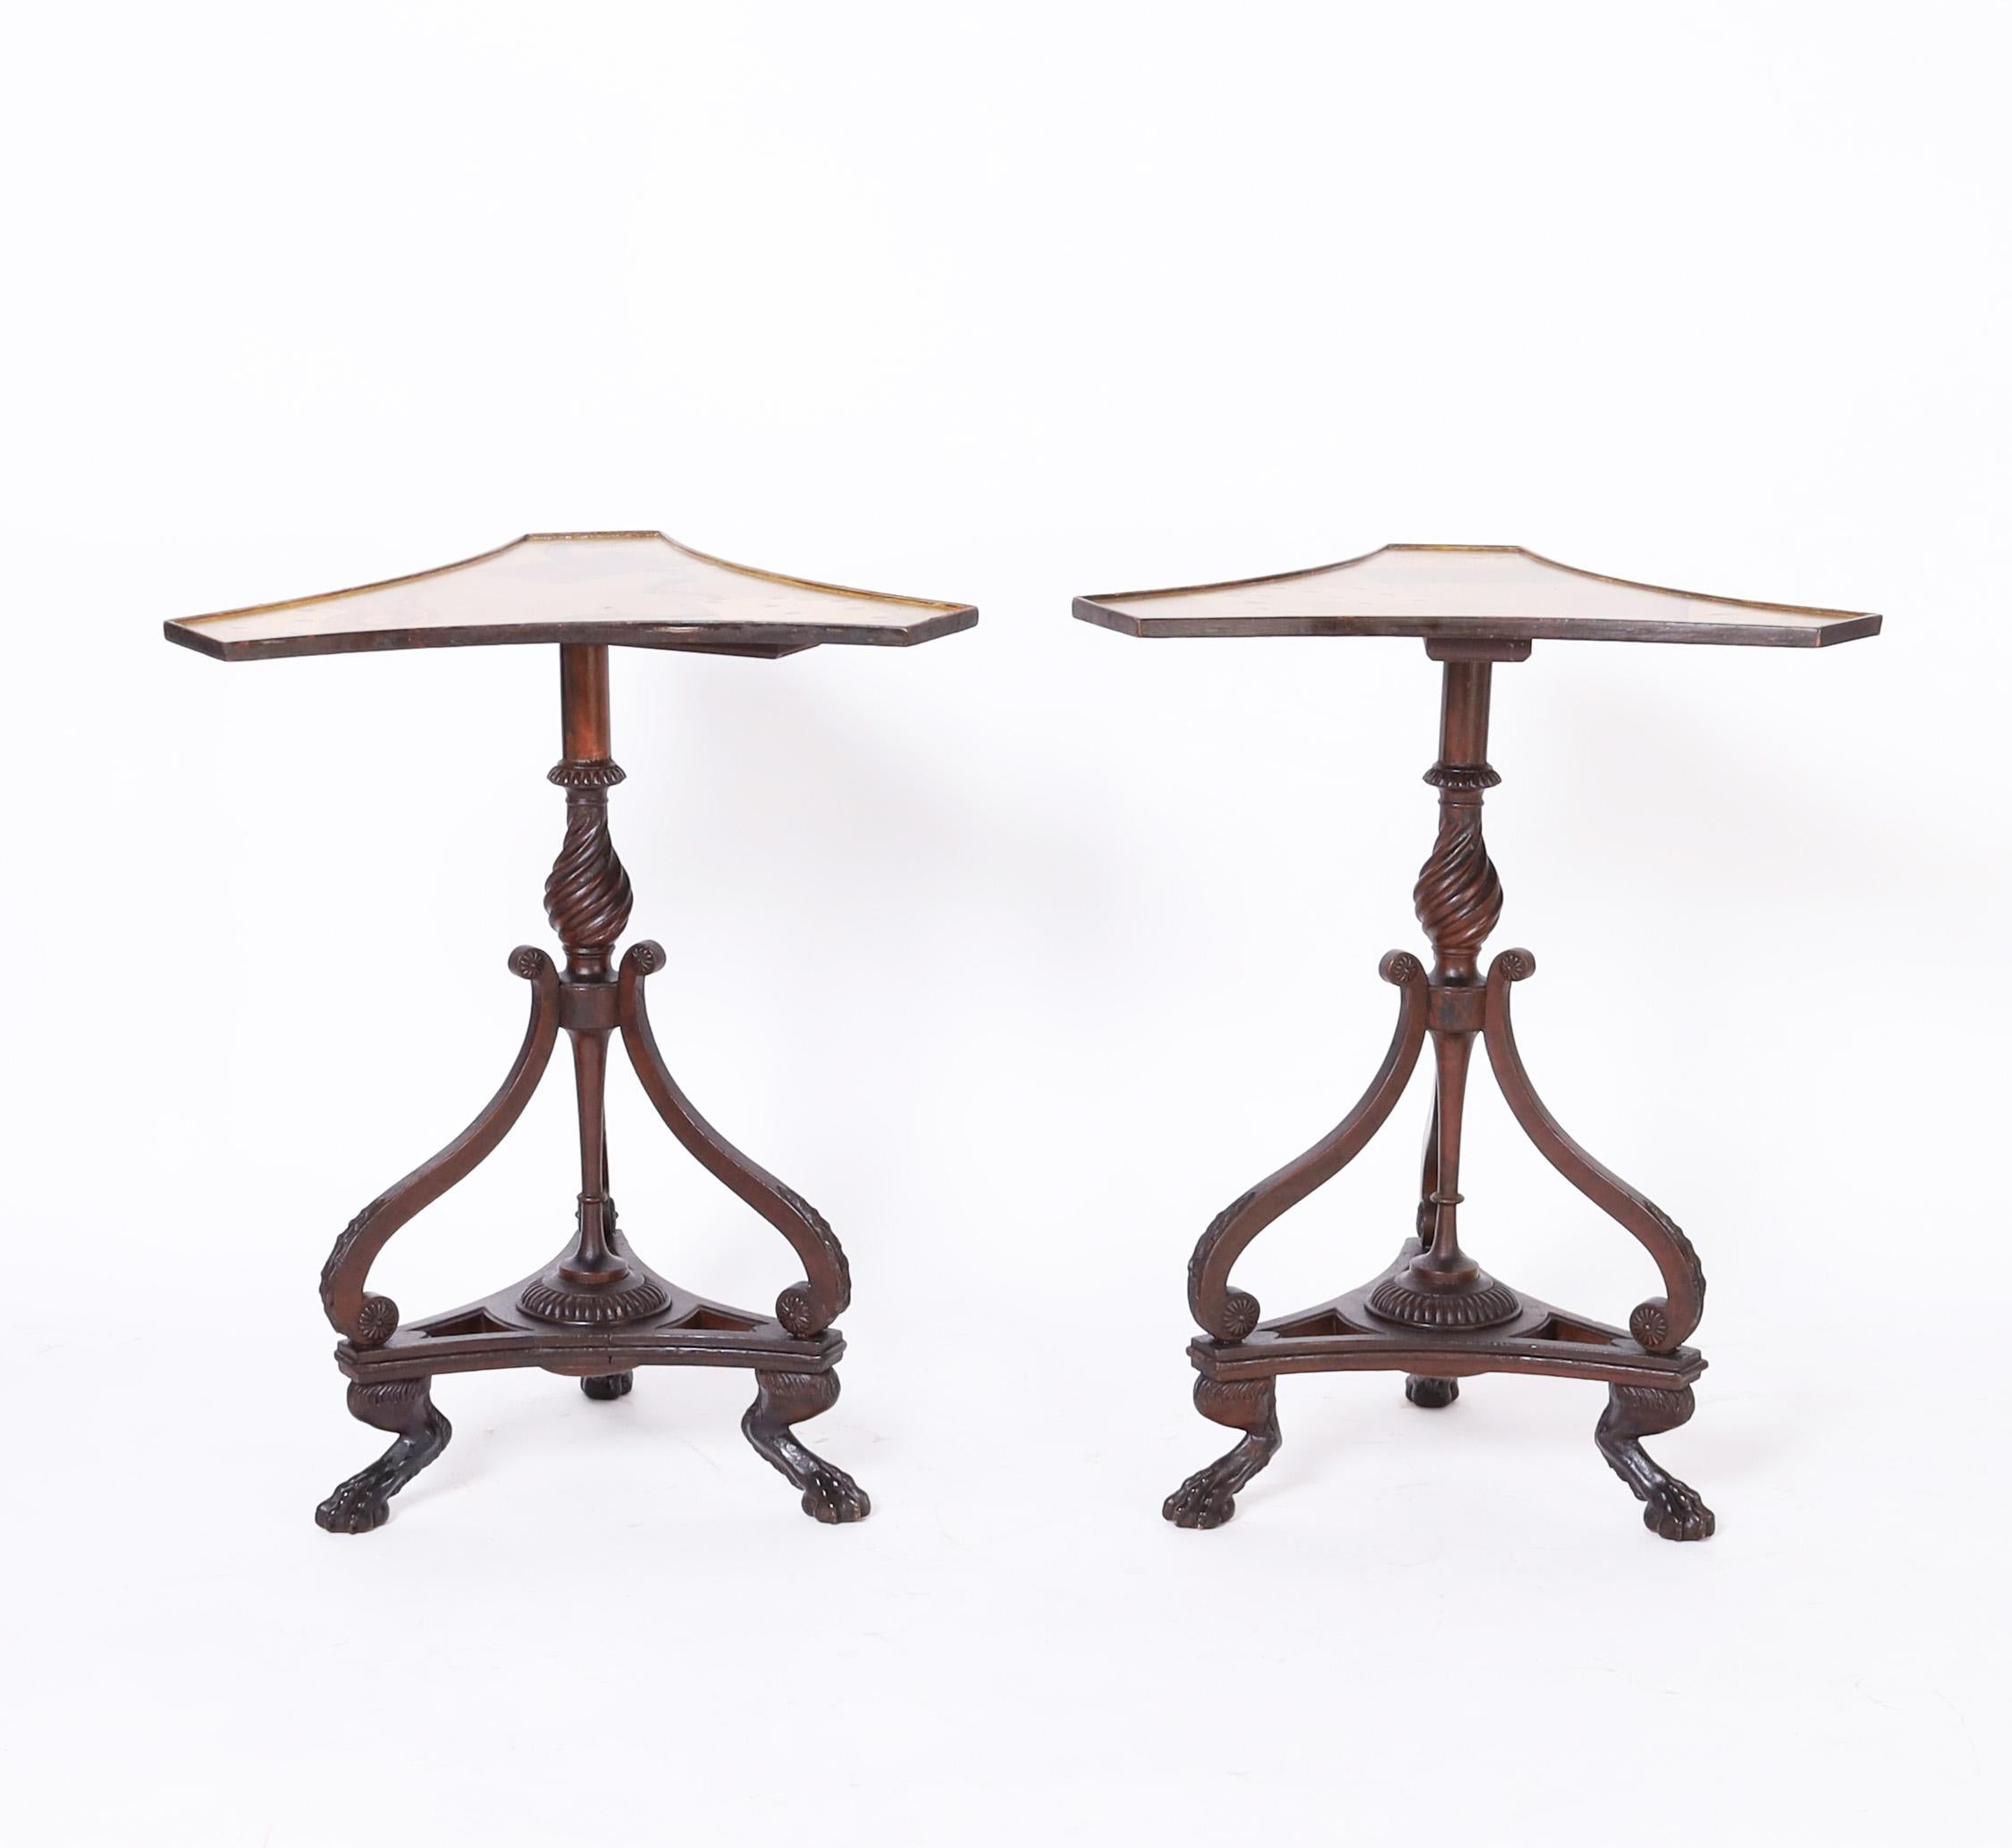 Hand-Carved  Regency Style Pair of Antique English Stands with Tromp L'oeil Tops